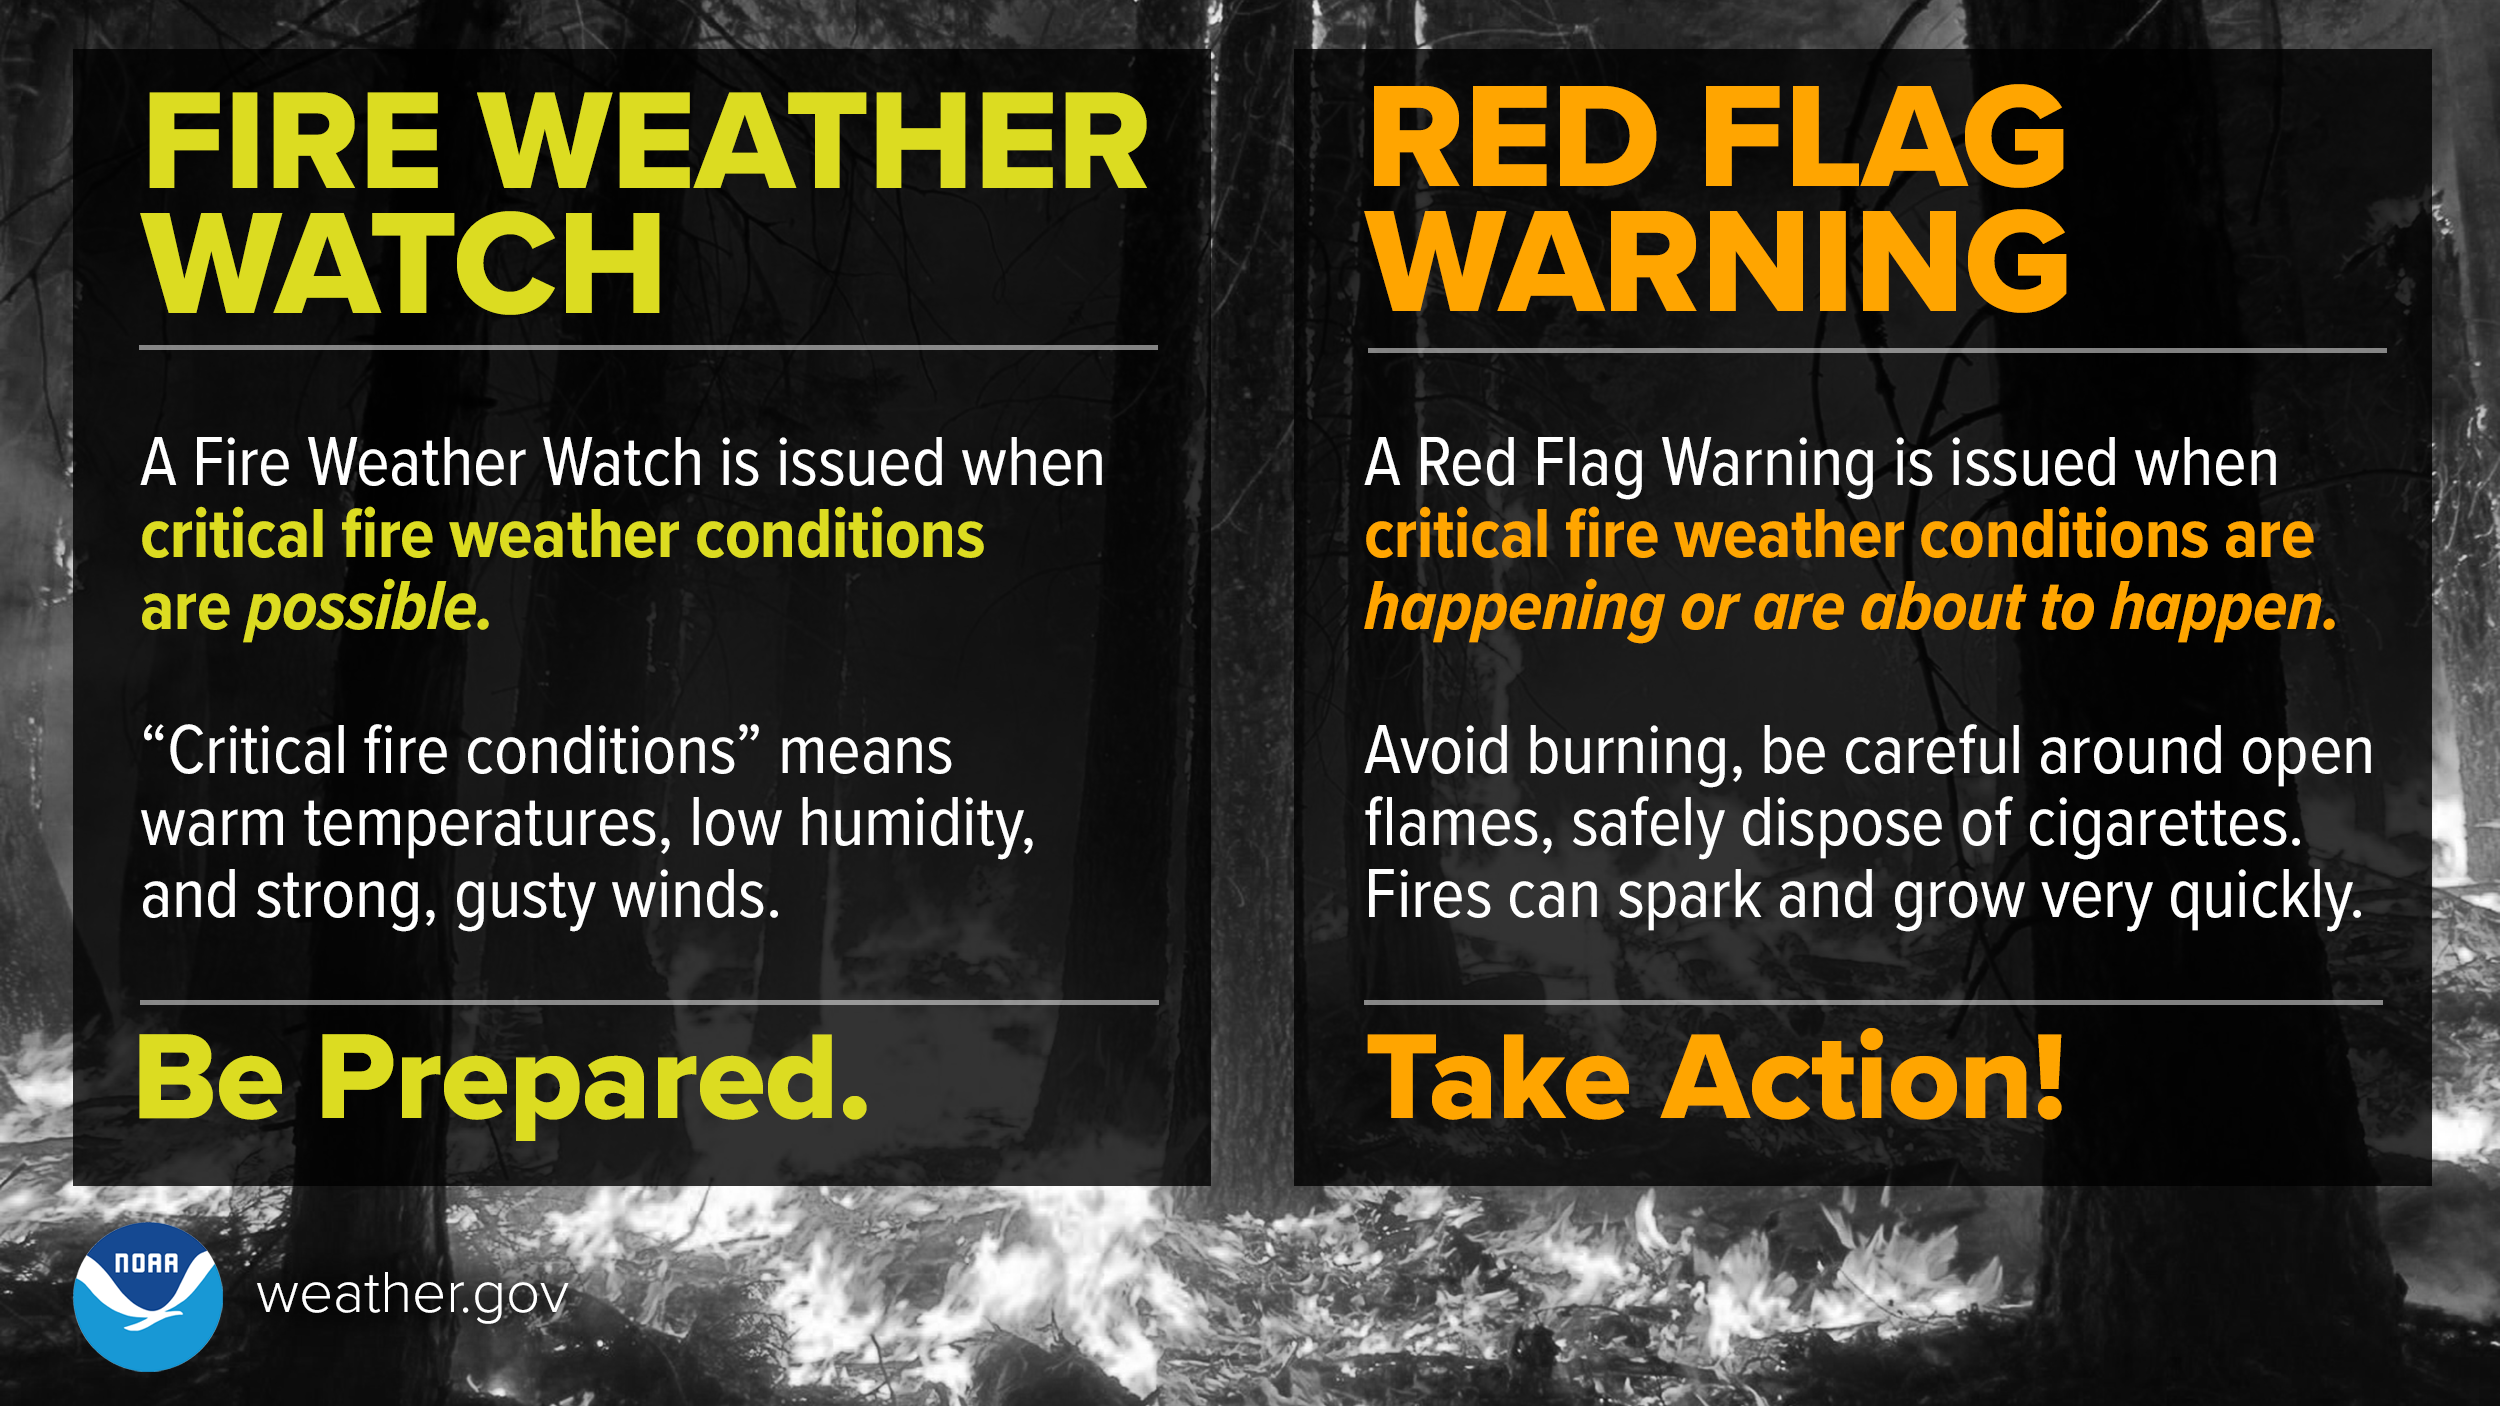 Fire Weather Watch means be prepared. A Fire Weather Watch is issued when critical fire weather conditions are possible. 'Critical fire conditions' means warm temperatures, low humidity, and strong, gusty winds. Red Flag Warning means take action! A Red Flag Warning is issued when critical fire conditions are happening or are about to happen. Avoid burning, be careful around open flames, safely dispose of cigarettes. Fires can spark and grow very quickly.